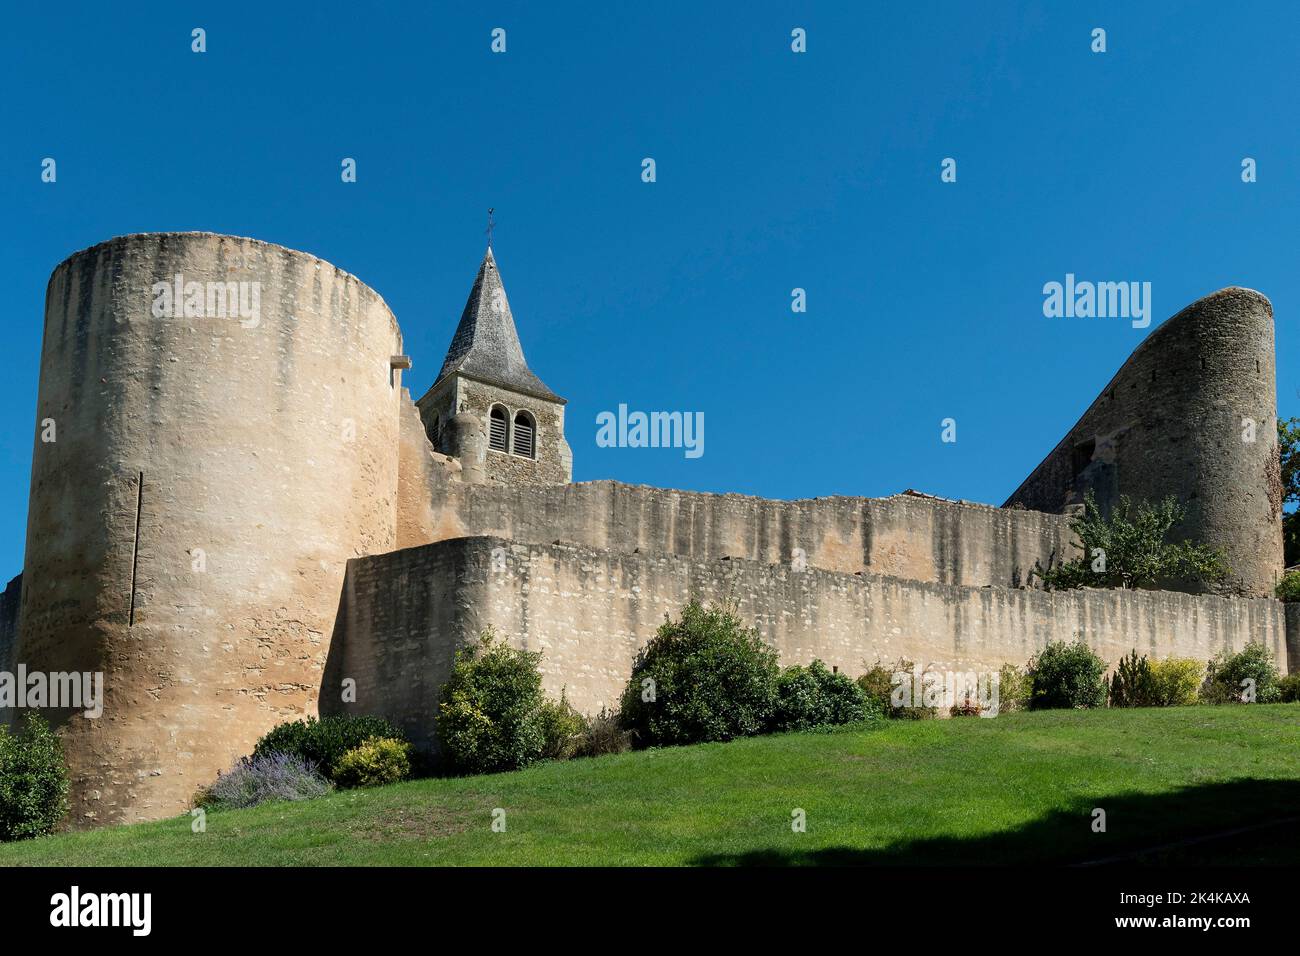 Land of Troncais, Ainay le Chateau. Remains of fortifications built in the Middle Ages. Allier department. Auvergne Rhone Alpes. France Stock Photo